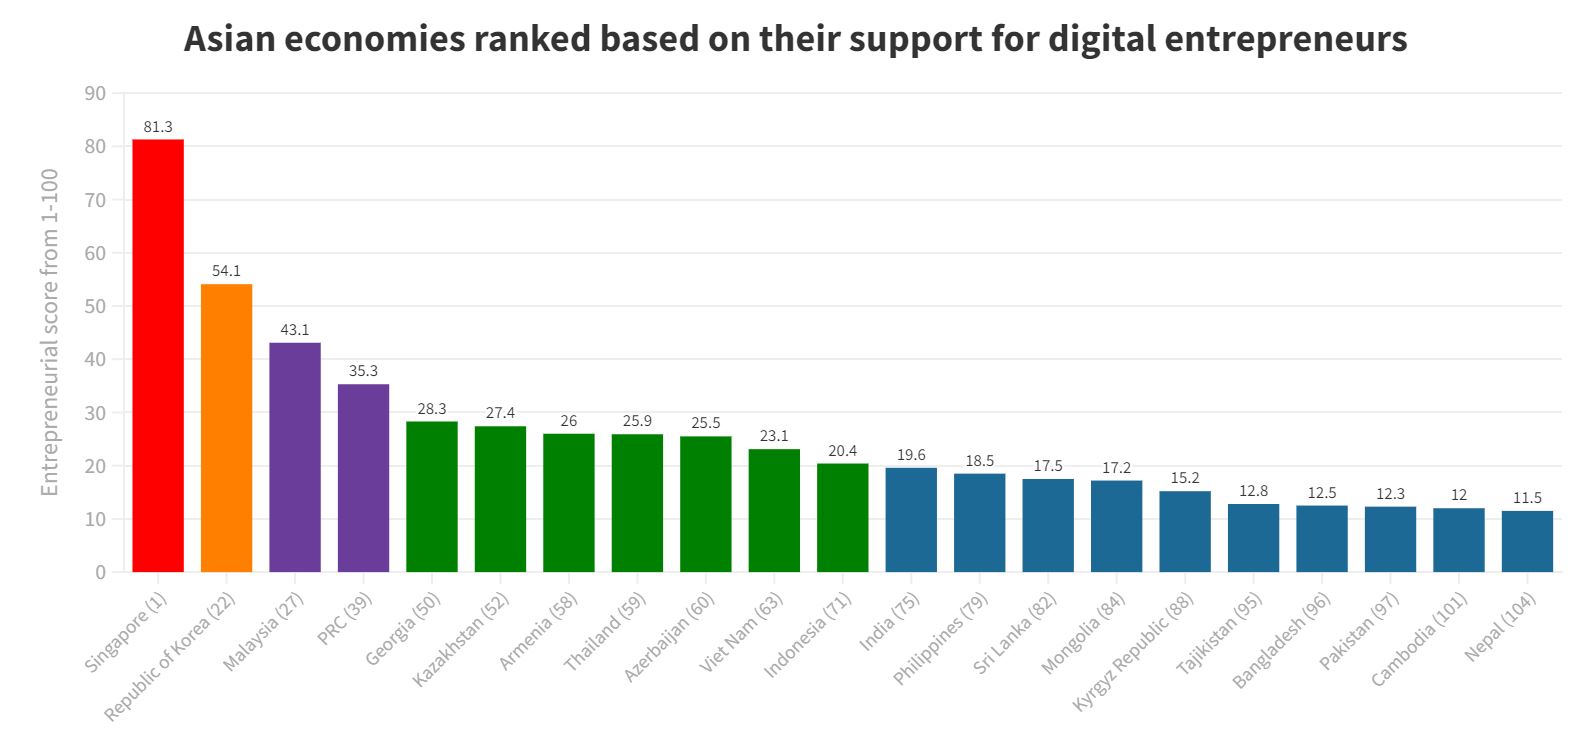  WhichAsian Countries Are Most Supportive of Digital Entrepreneurship?